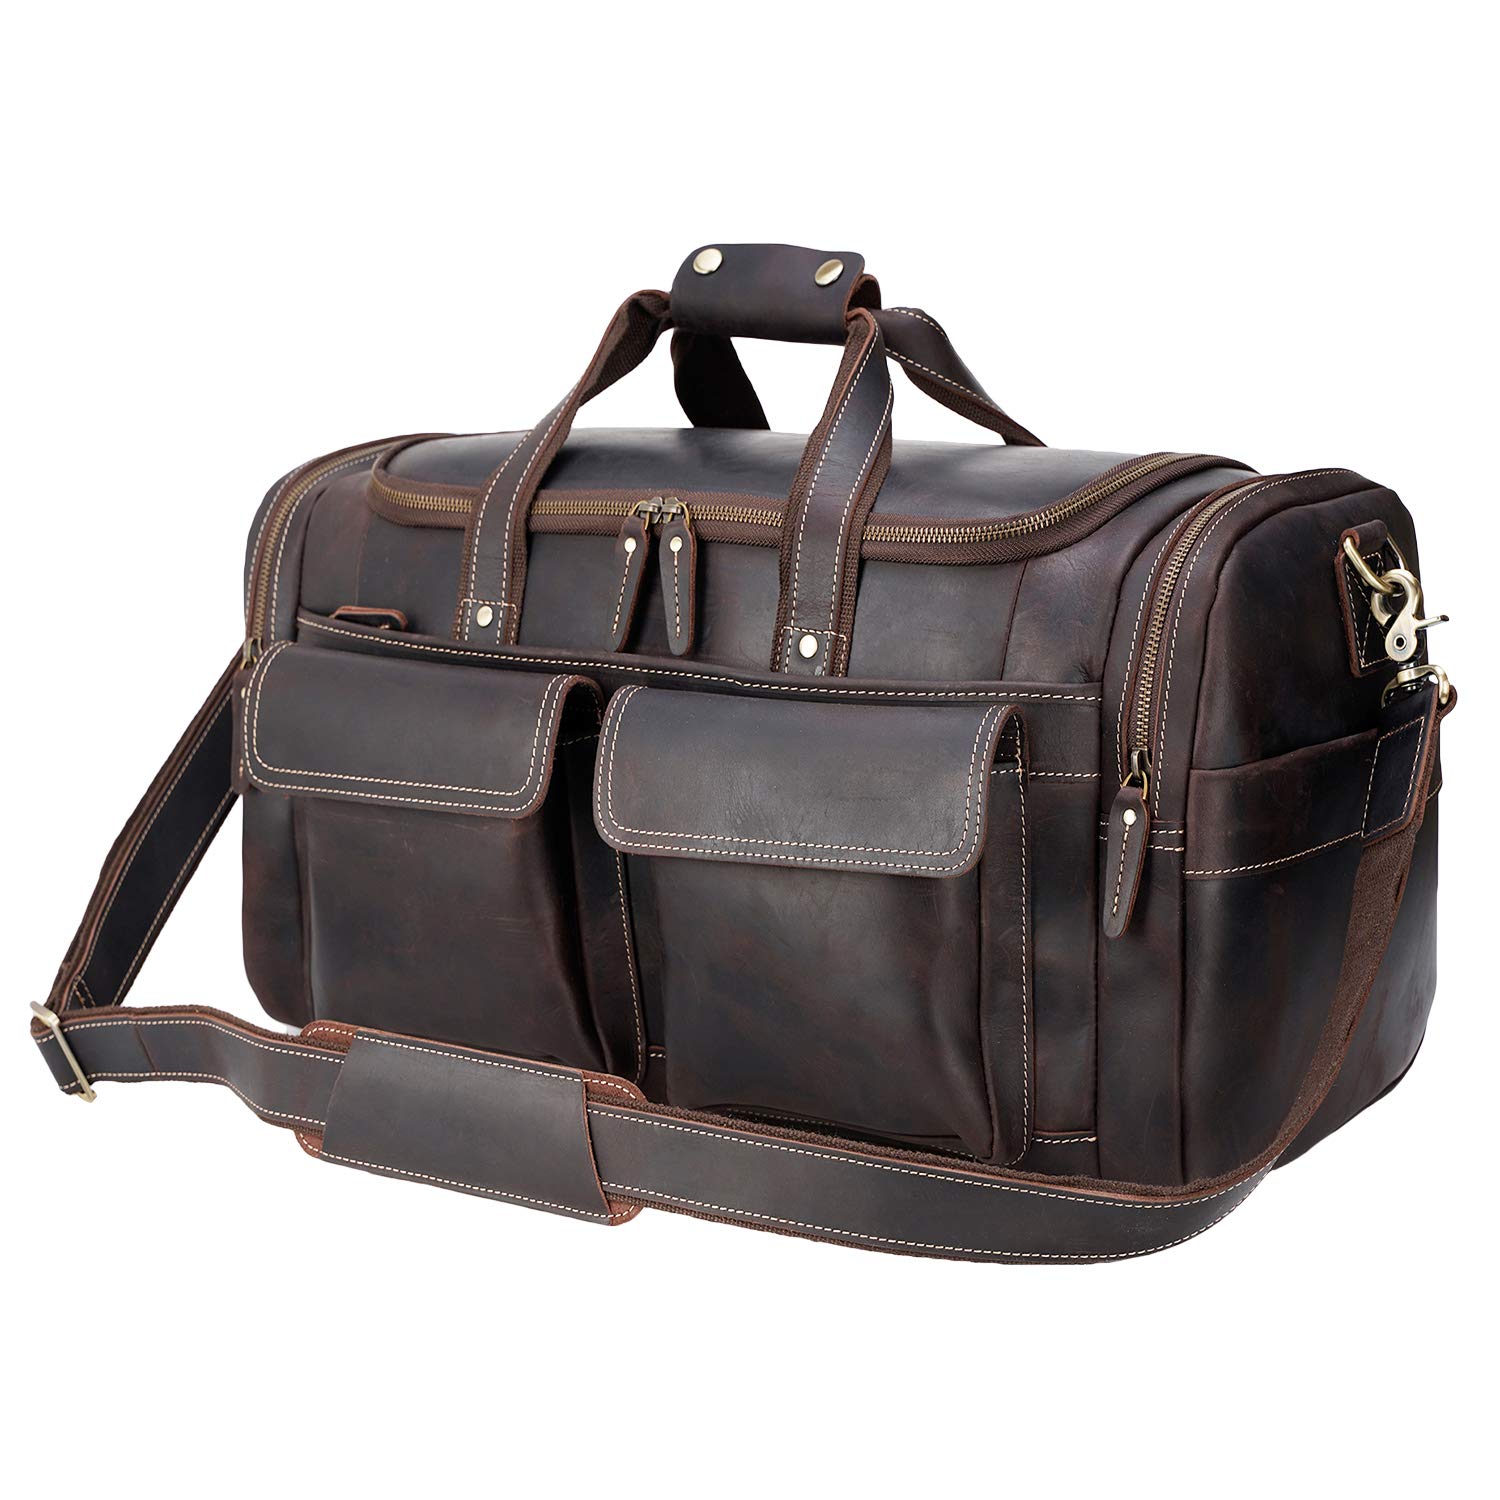 Polare 23 Waxed Canvas Cowhide Leather Travel Duffle Bag For Men 42L